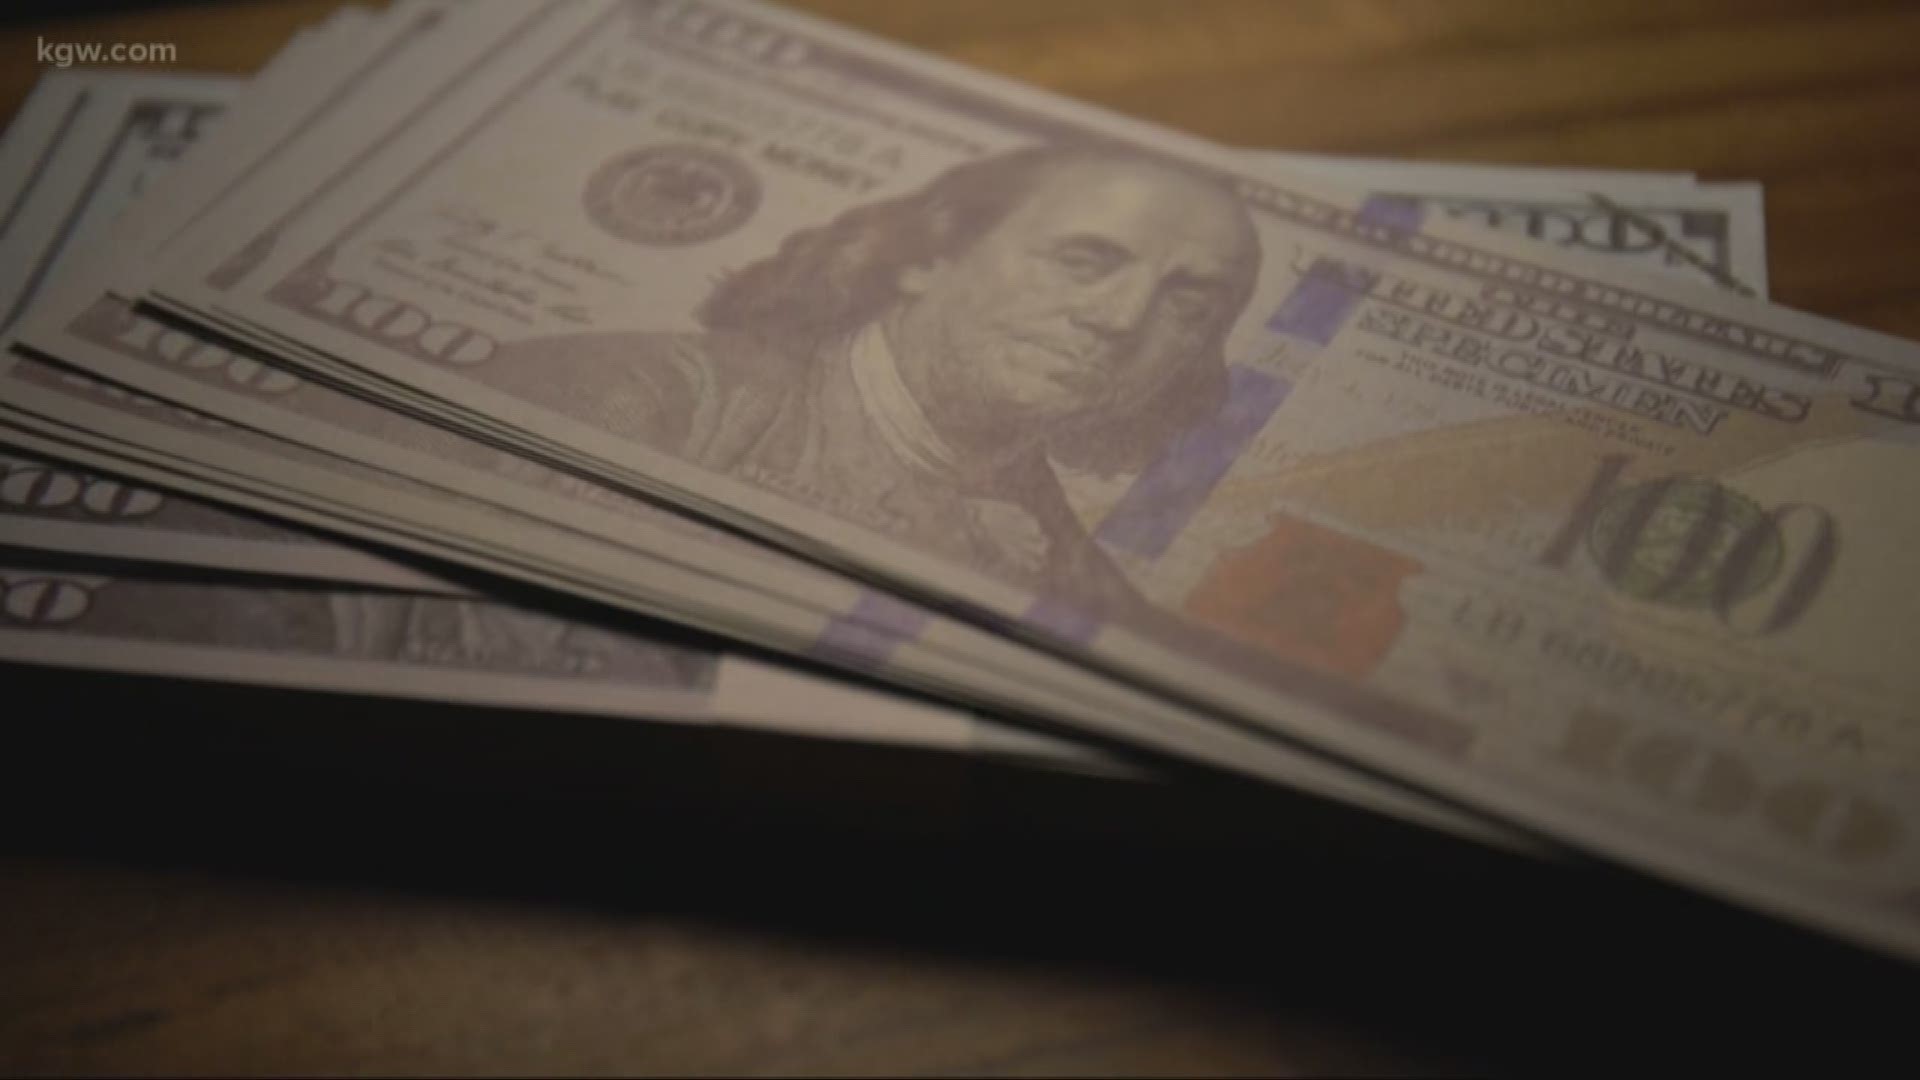 The latest in counterfeit currency con come courtesy of Tinseltown and the Web. Con artists are selling fake money used in movies that their customers in turn try and pass off to unsuspecting businesses.